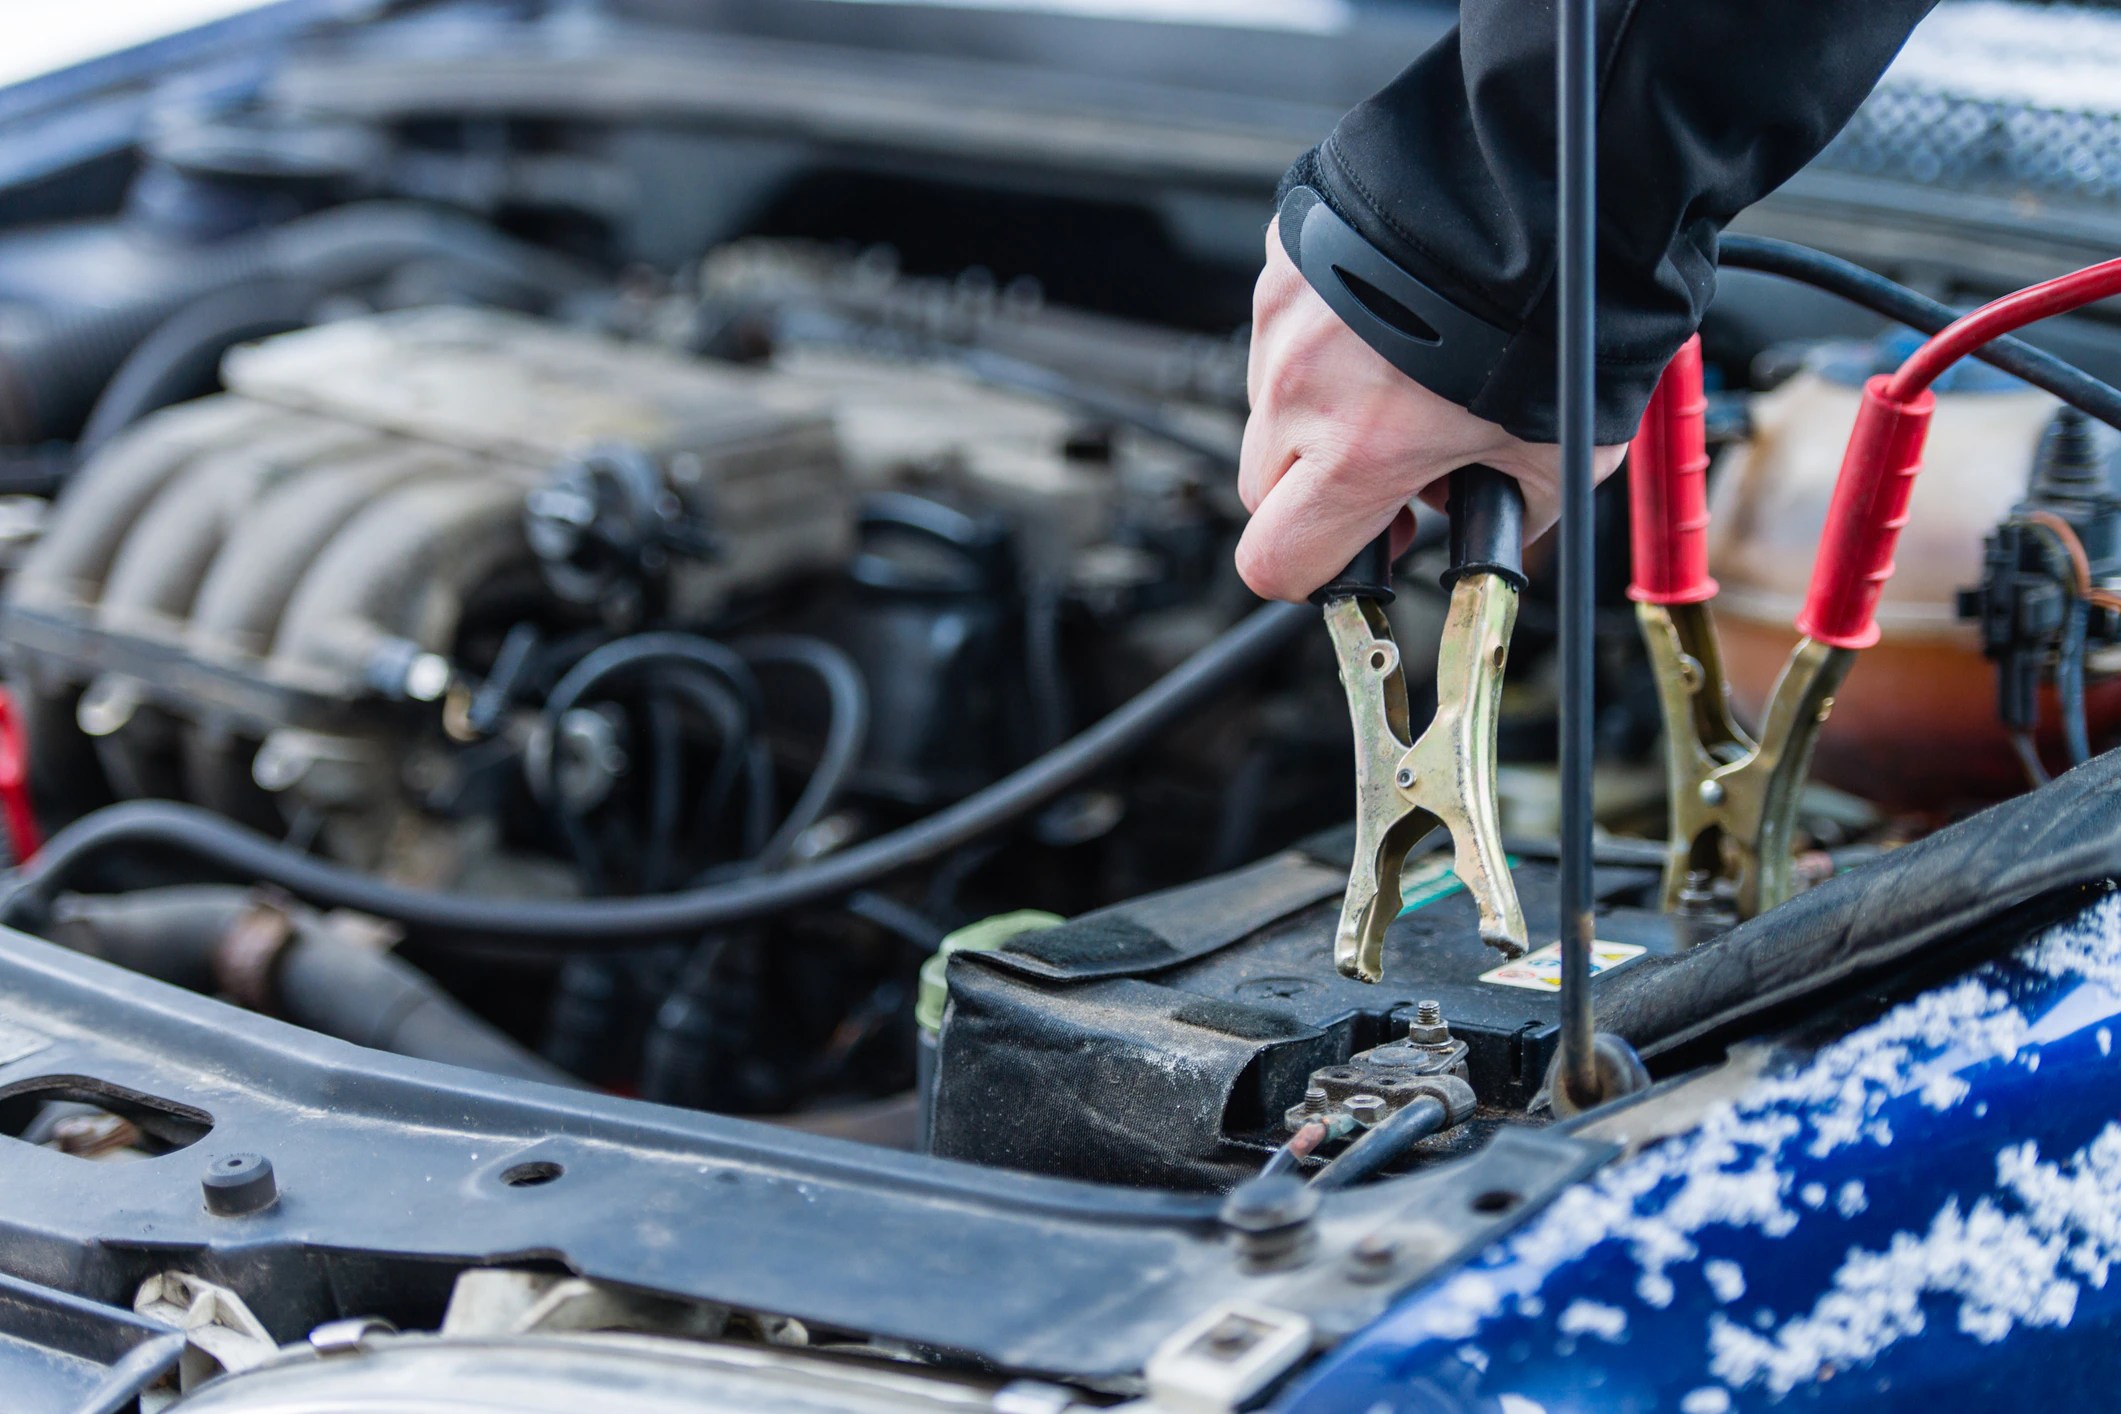 How To Jump Start A Car With No Battery